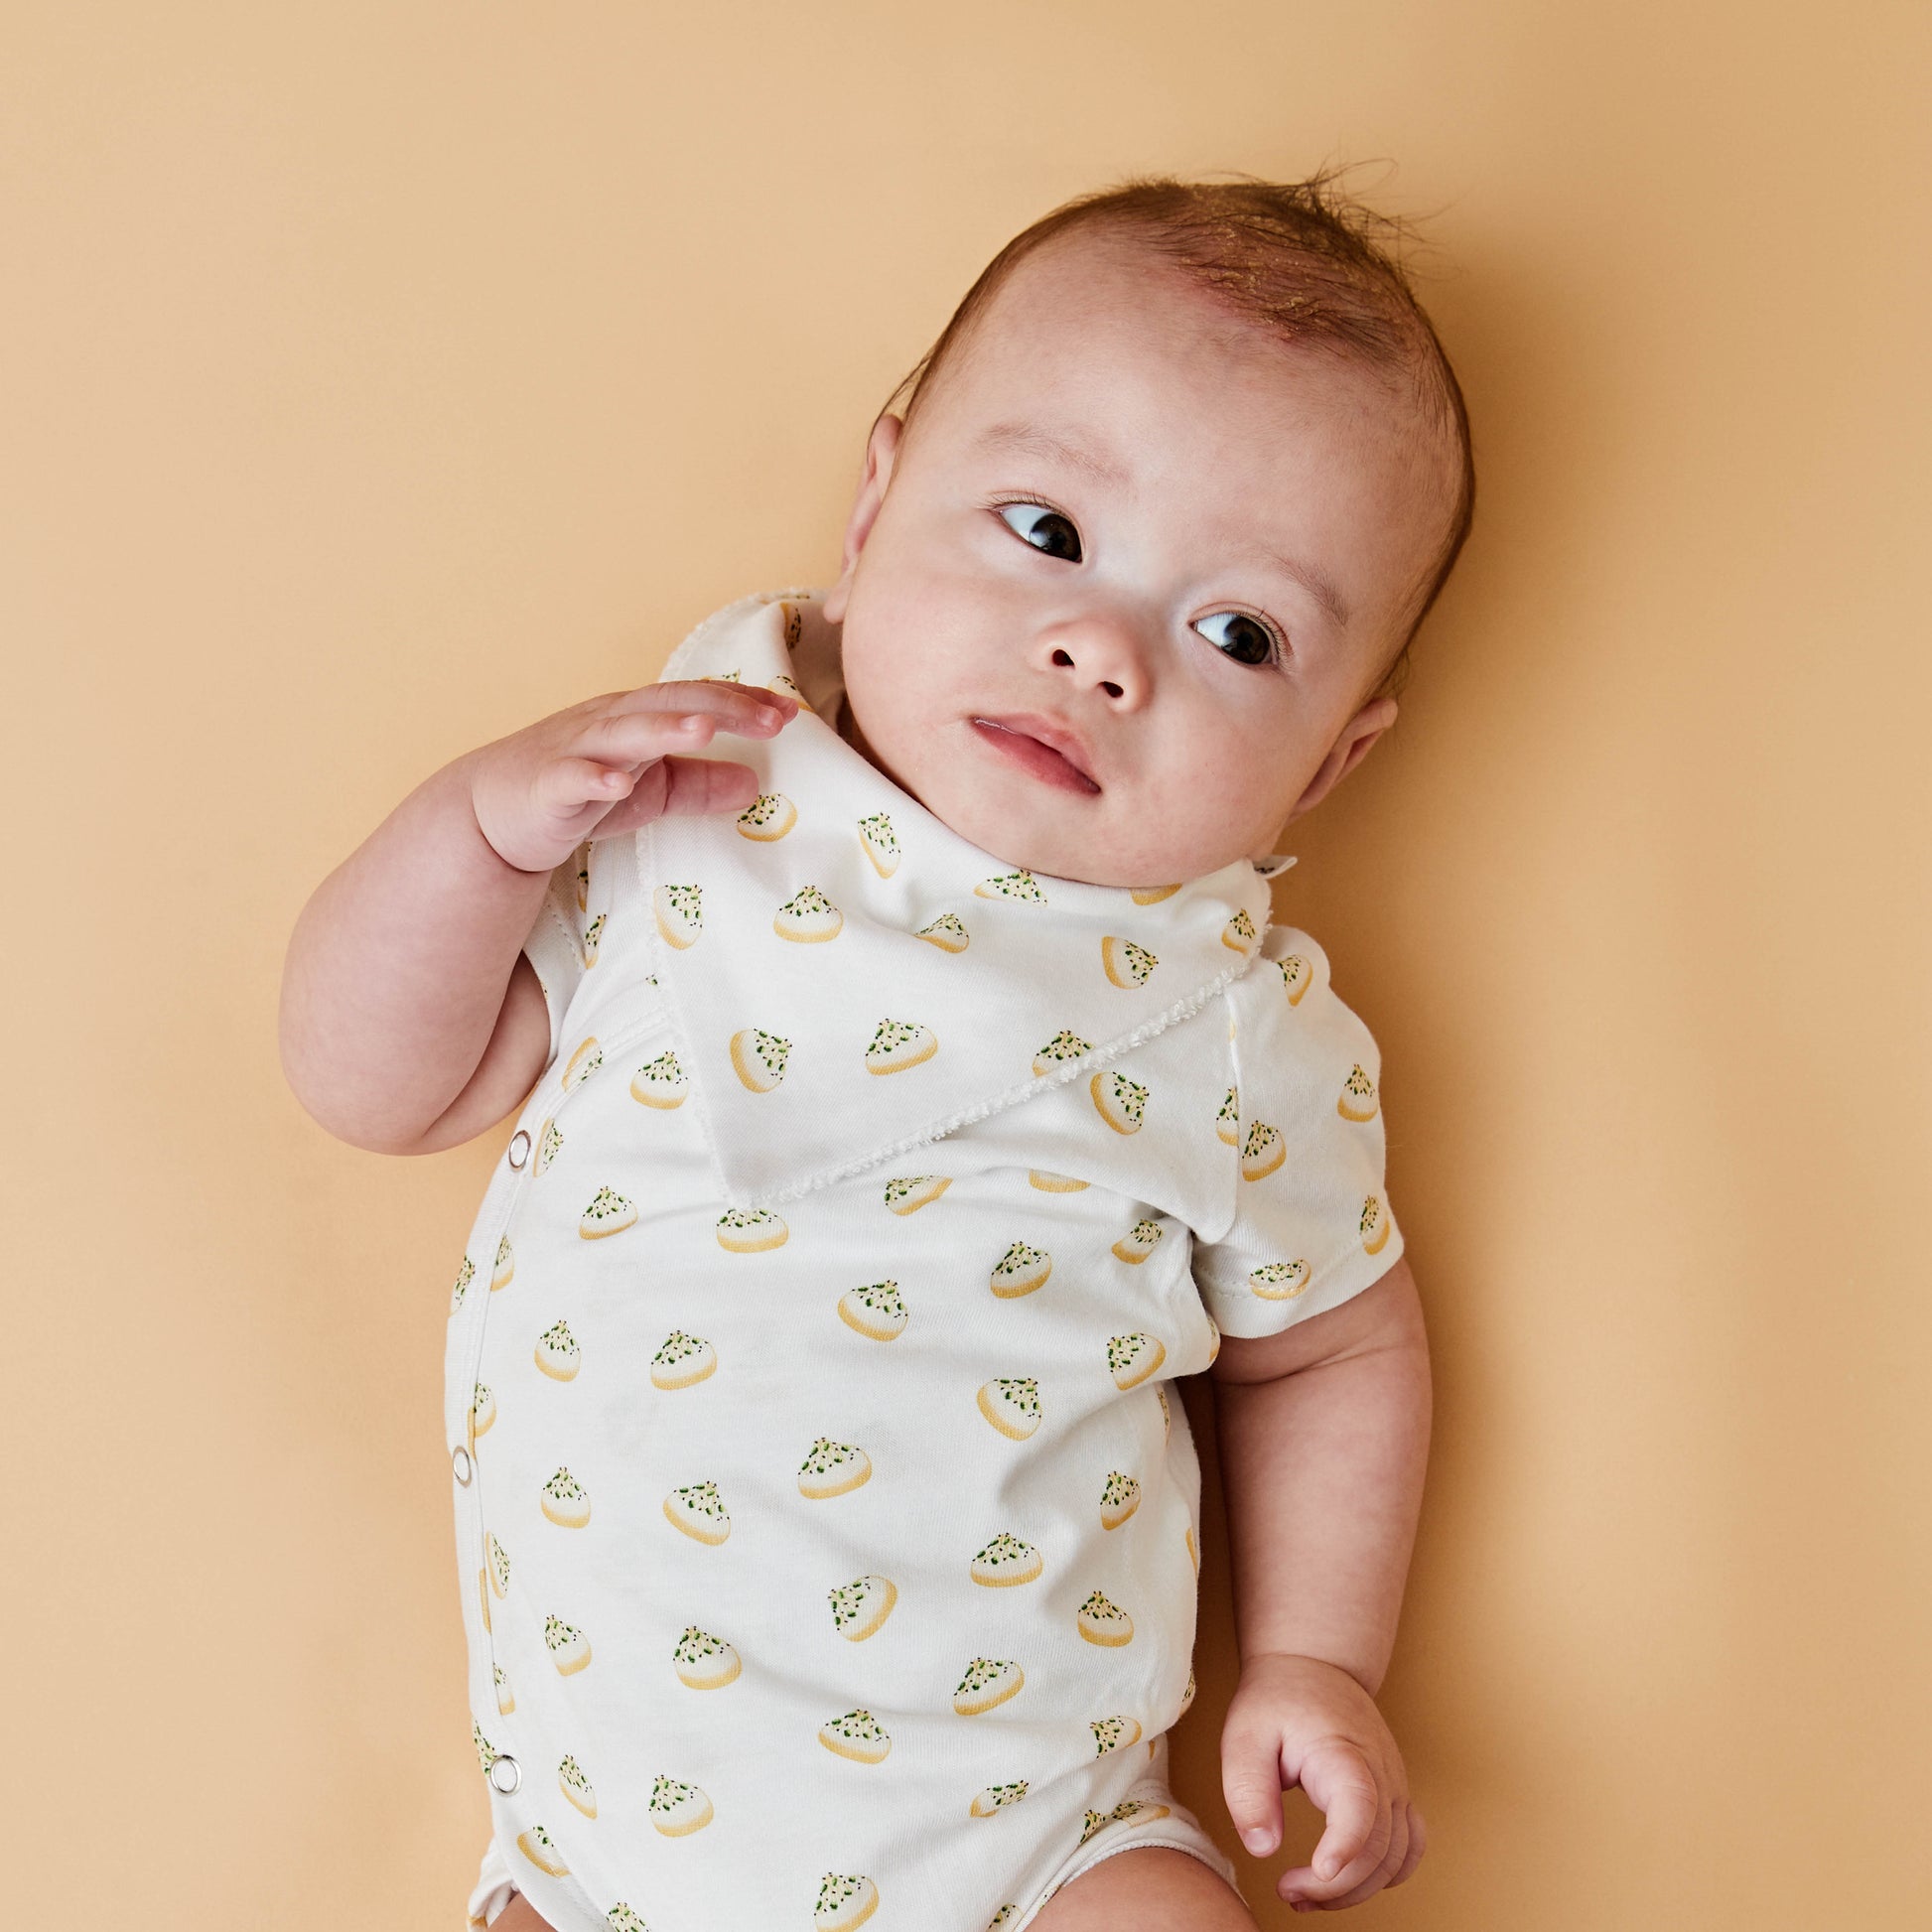 Baby with bodysuit and bib